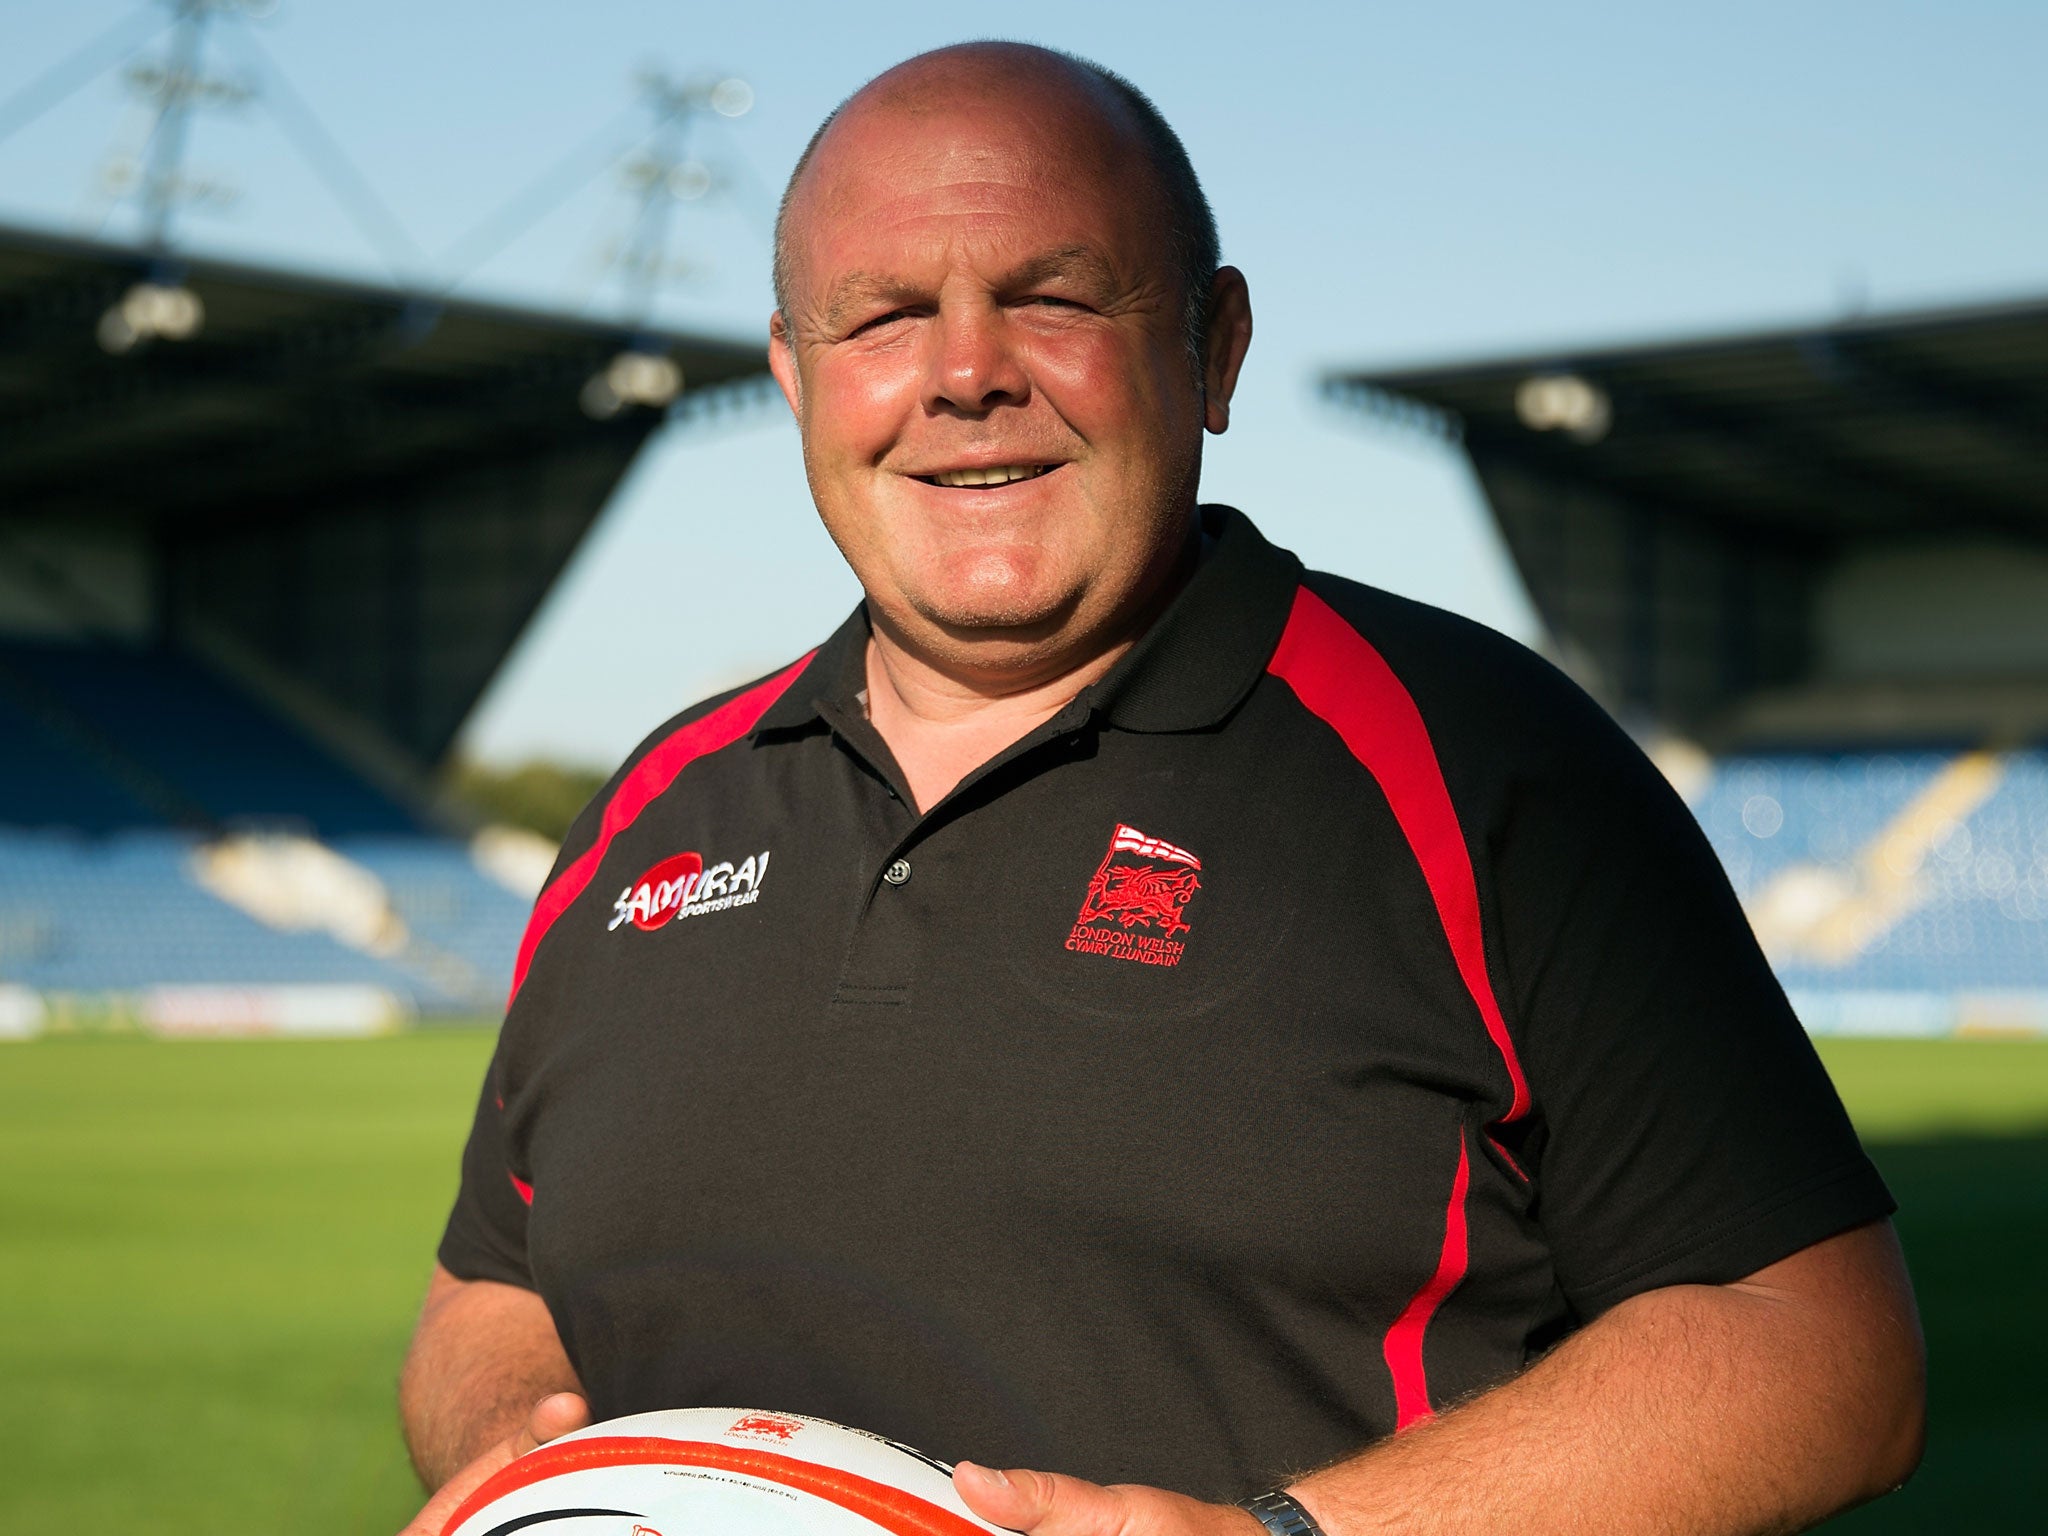 London Welsh’s new coach Justin Burnell is vying for promotion